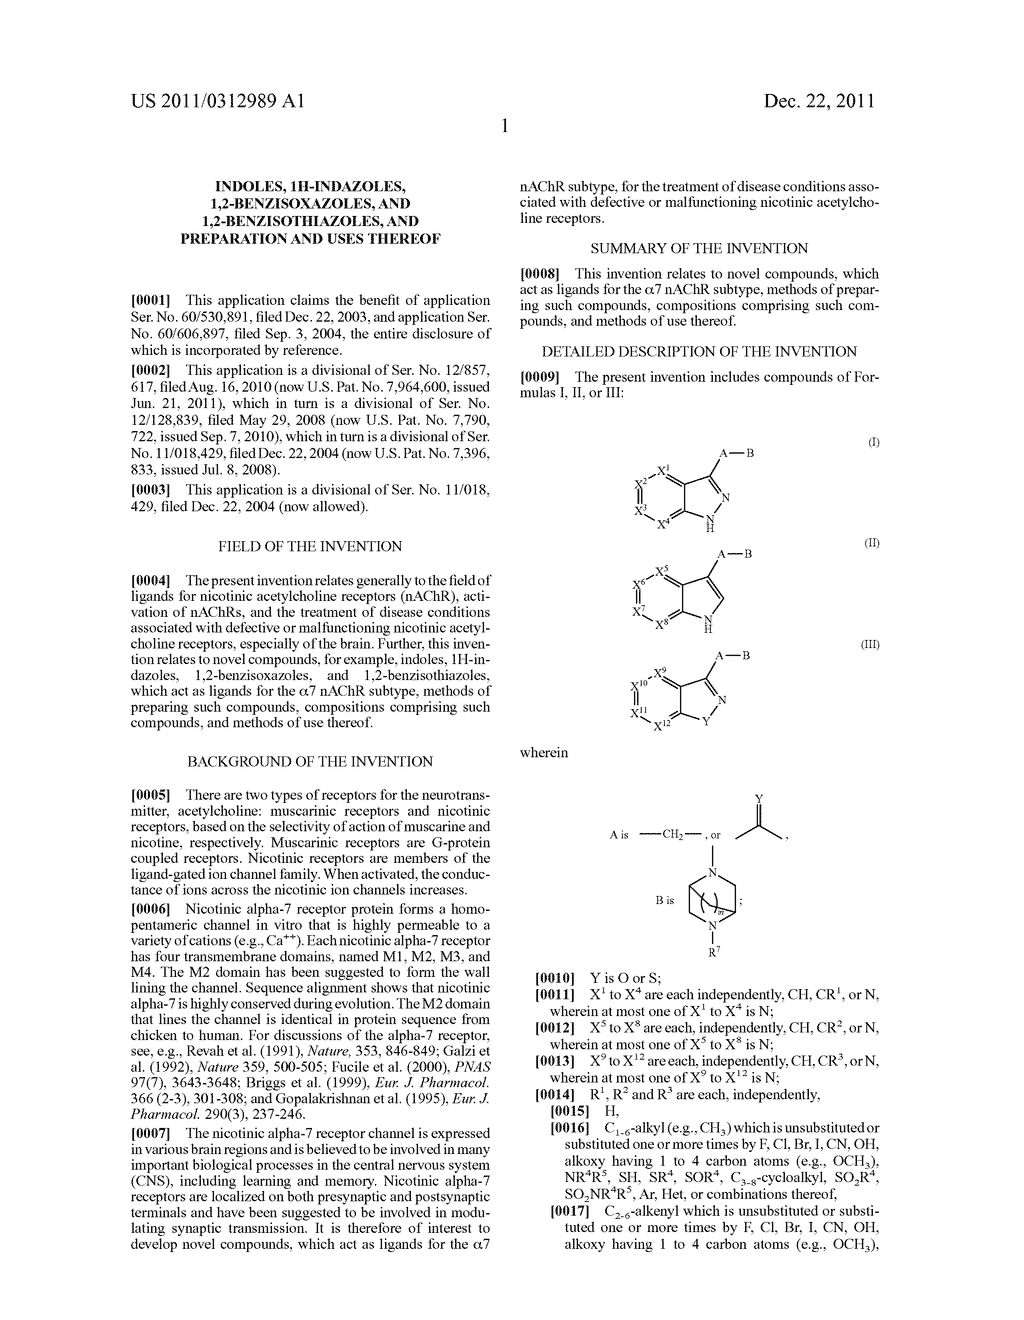 INDOLES, 1H-INDAZOLES, 1,2-BENZISOXAZOLES, AND 1,2-BENZISOTHIAZOLES, AND     PREPARATION AND USES THEREOF - diagram, schematic, and image 02